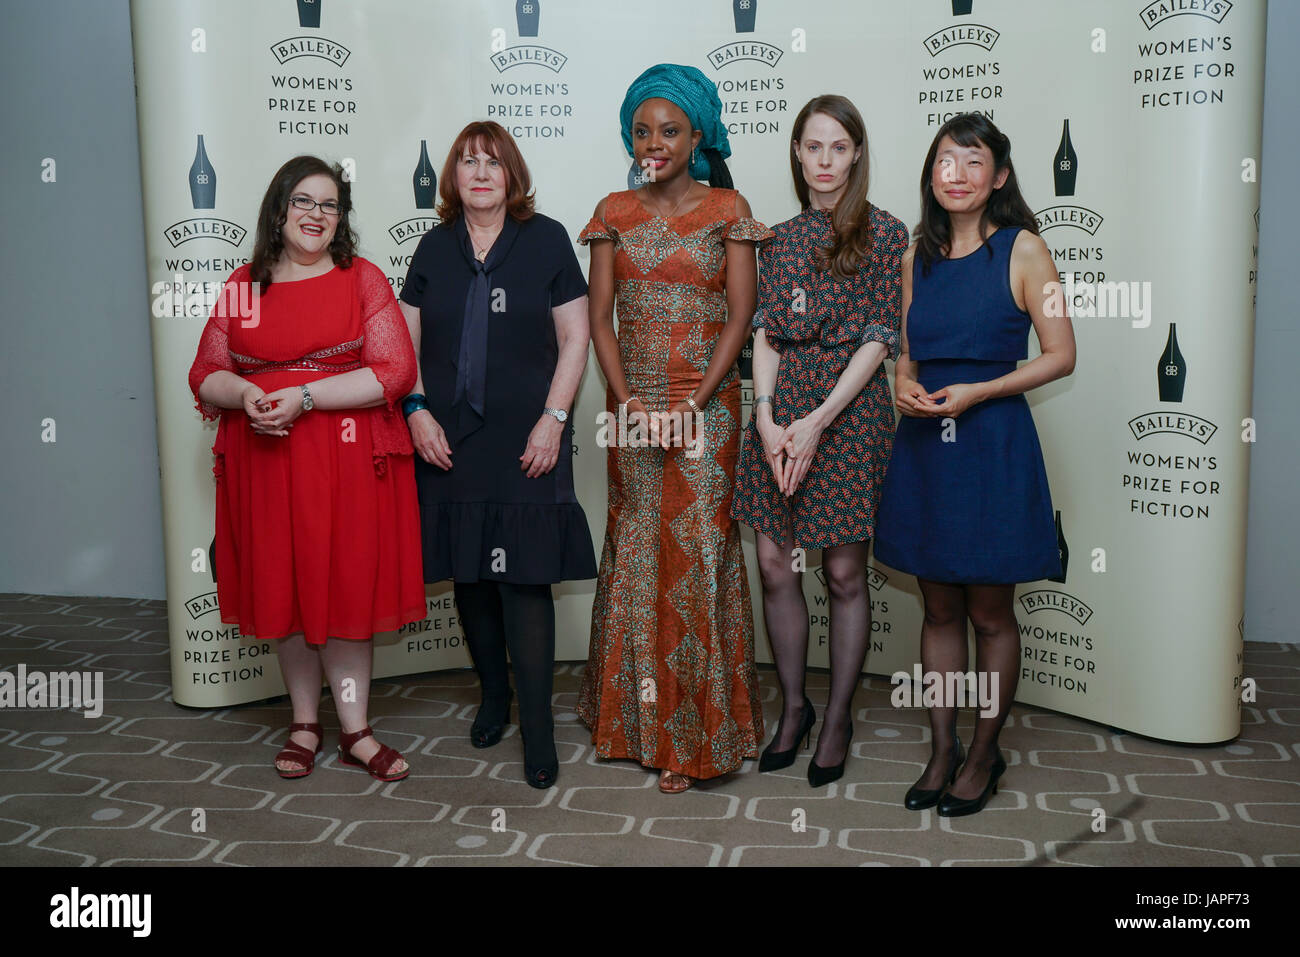 London, UK. 7th June, 2017. Bailey's Women Prize for Fiction 2017 shortlisted authors (L-R) Naomi Alderman, with her book 'The Power', Linda Grant, with her book 'The Dark Circle', Ayobami Adebayo, with her book 'Stay With Me', Gwendoline Riley, with her book 'First Love' and Madeleine Thien, with her book 'Do Not Say We Have Nothing' Credit: See Li/Alamy Live News Stock Photo